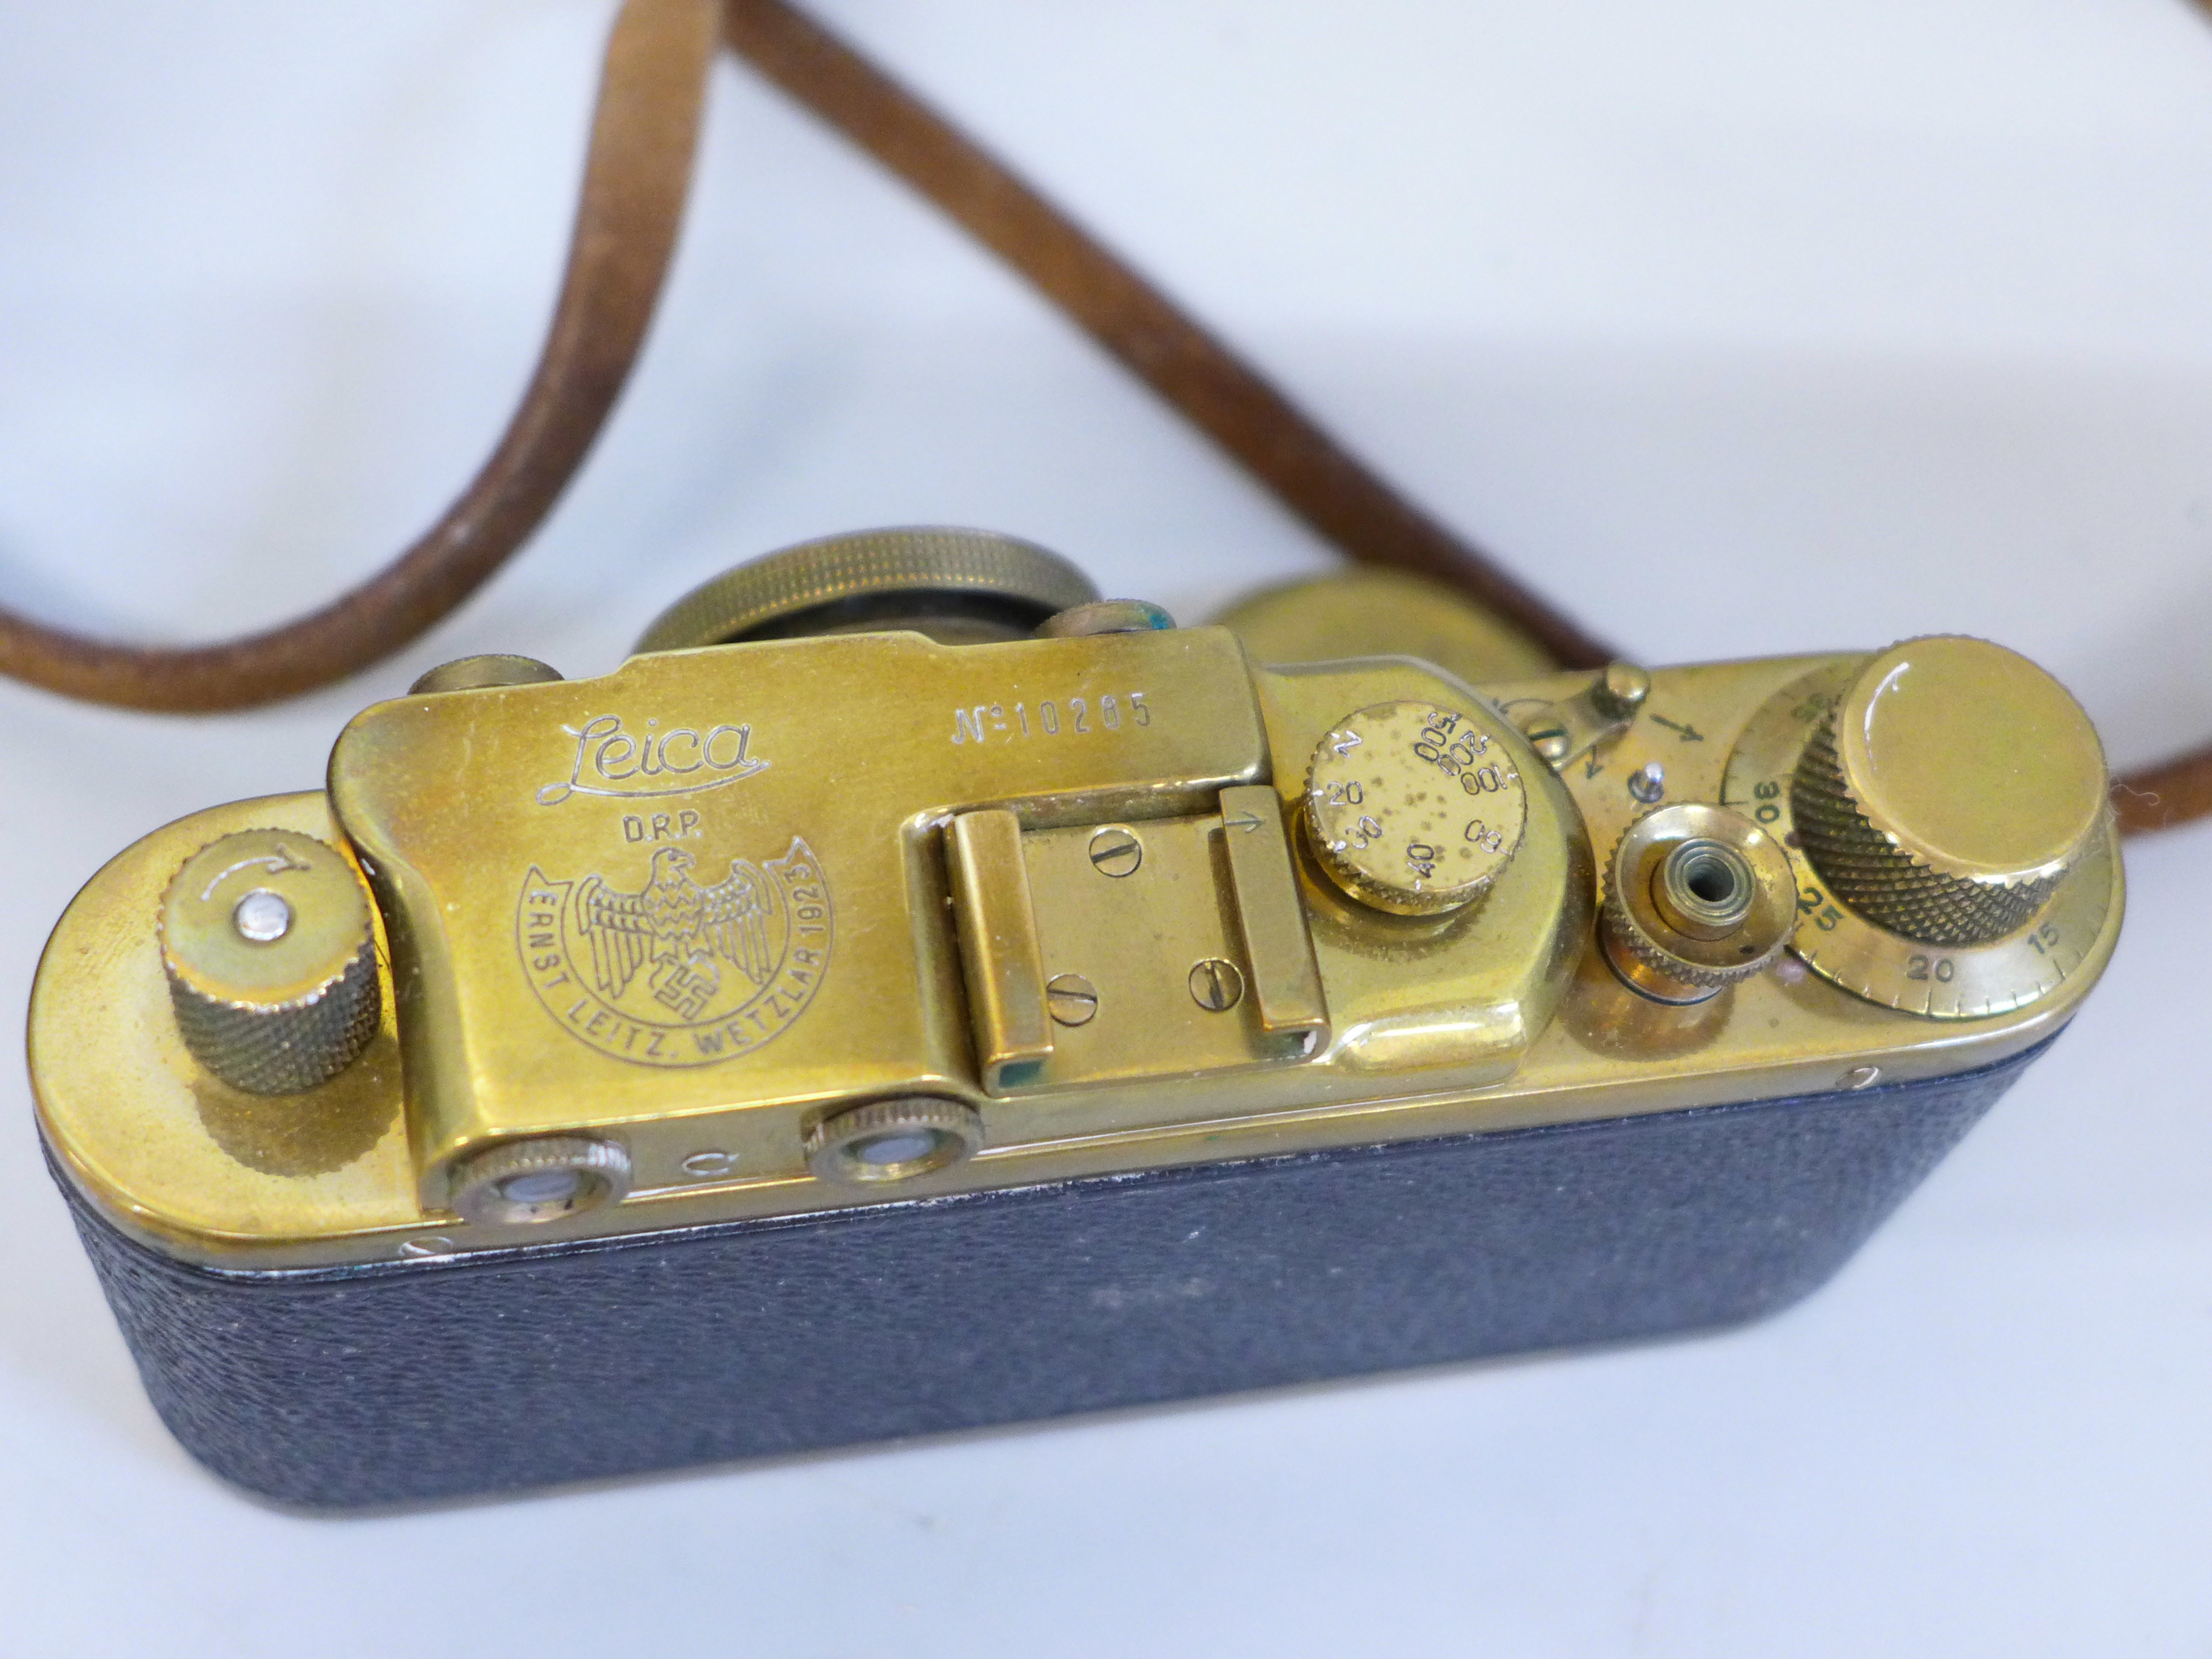 A Leica brass 1923 copy camera and leather case, made in Russia - Image 3 of 3